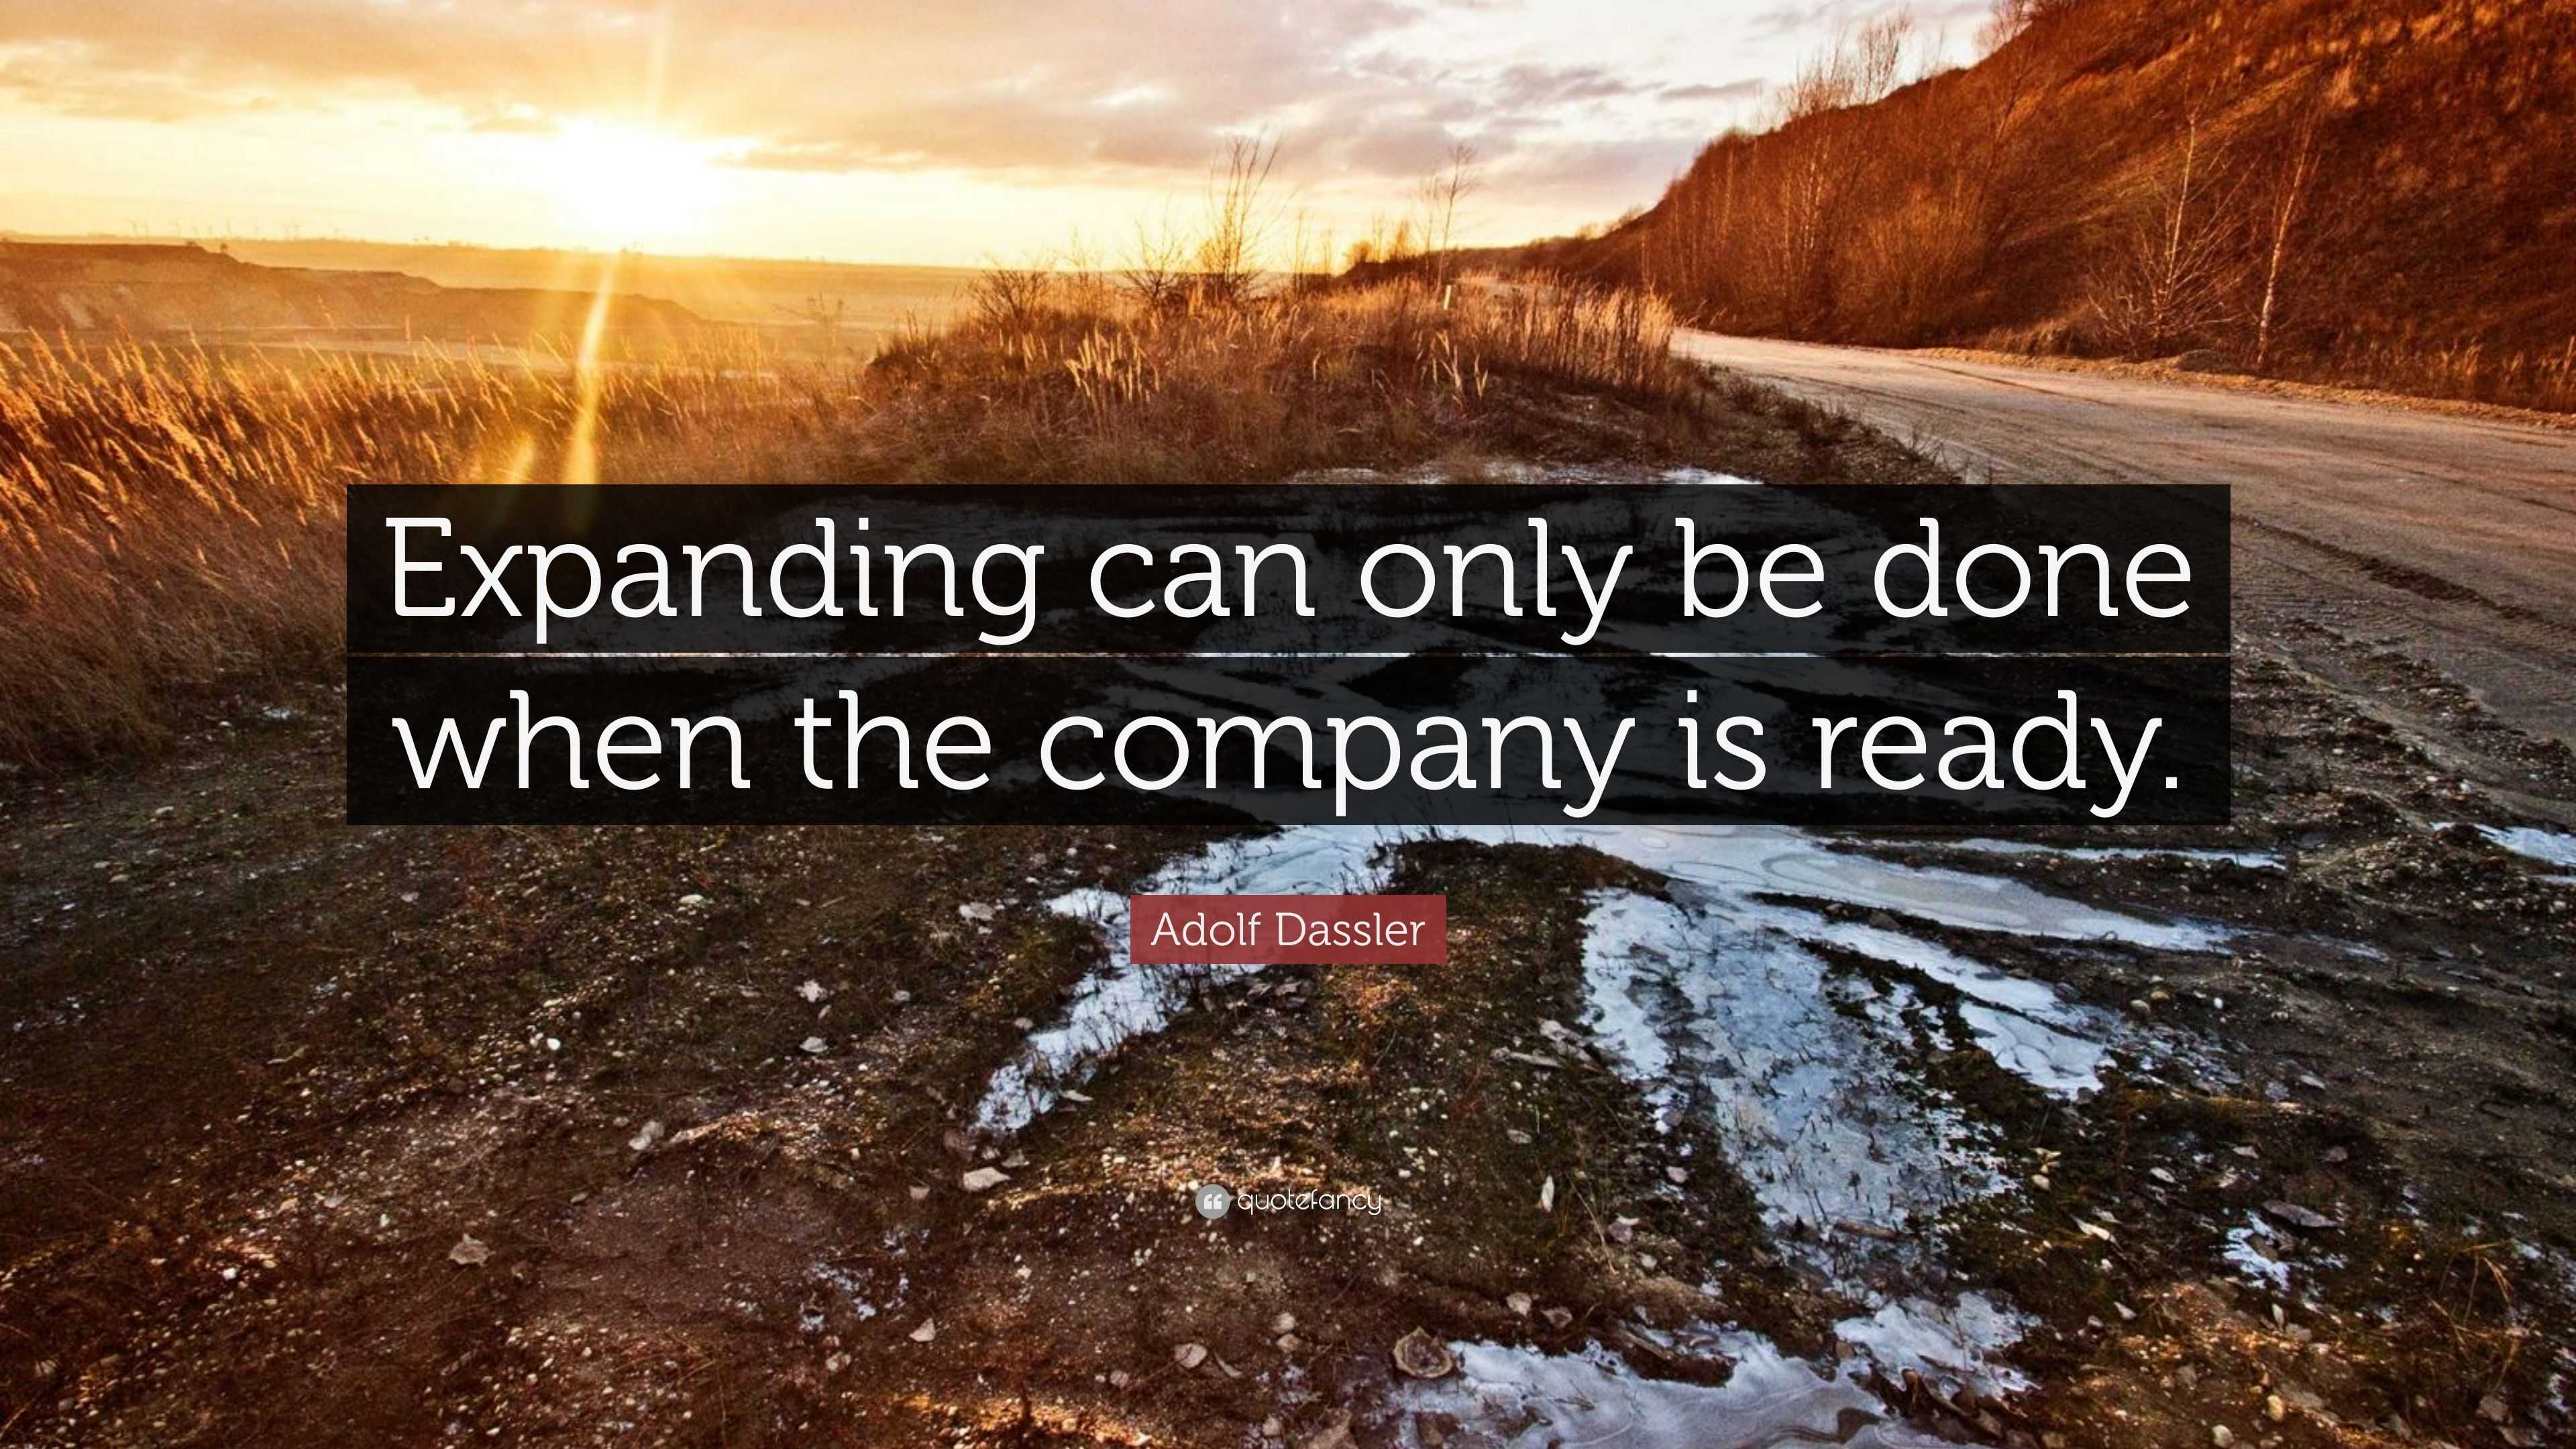 Adolf Dassler Quote: “Expanding can only be done when the company is ...